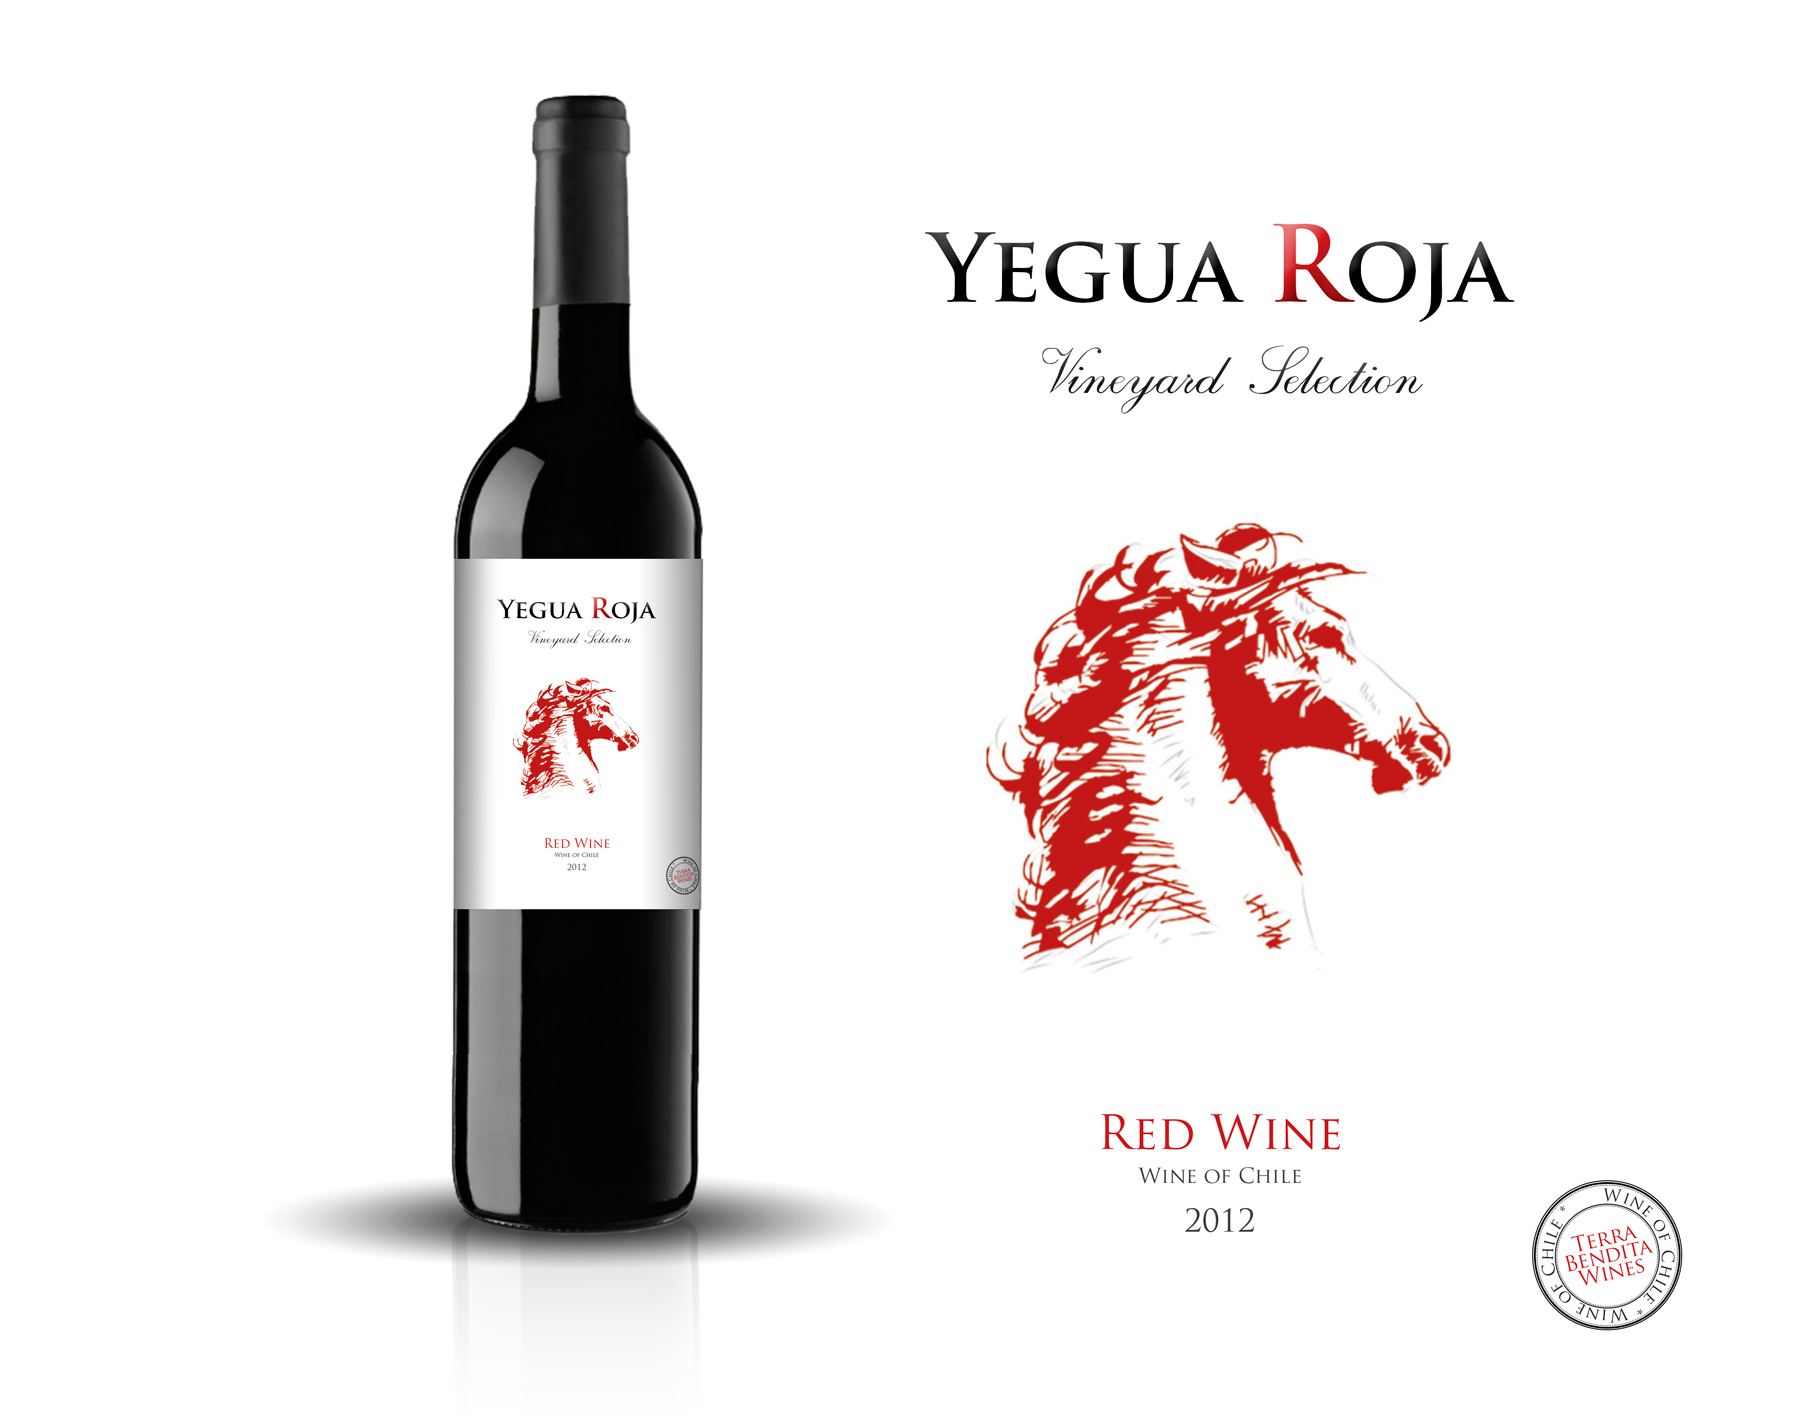 Portfolio of graphic and creative design works on wine labels and packaging for Chilean wine: YEGUA ROJA